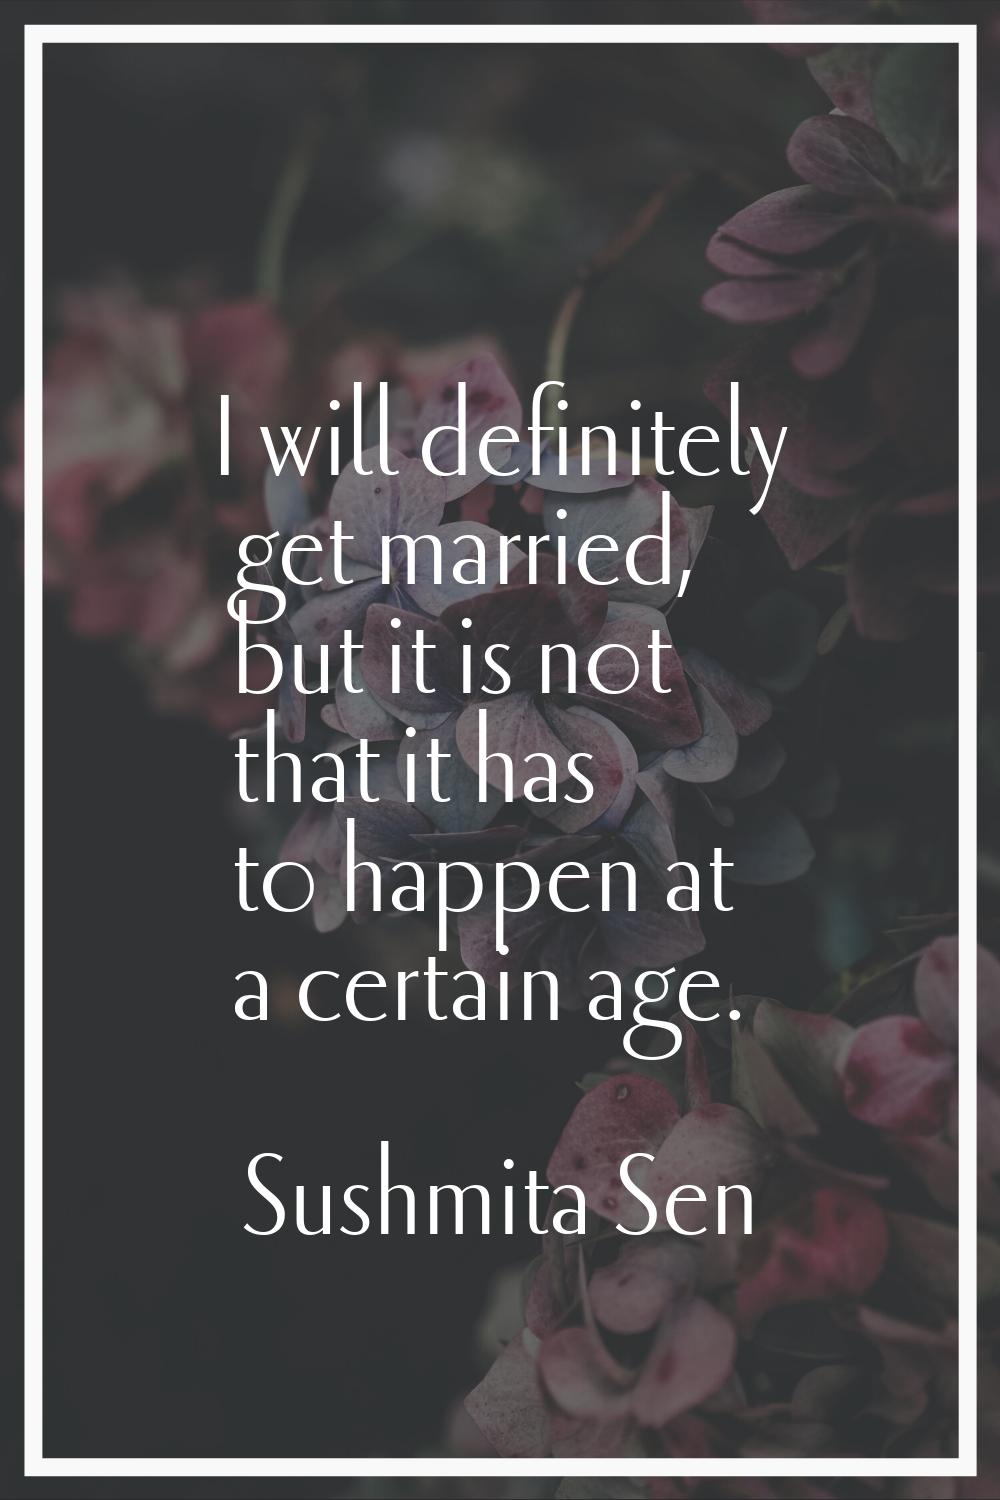 I will definitely get married, but it is not that it has to happen at a certain age.